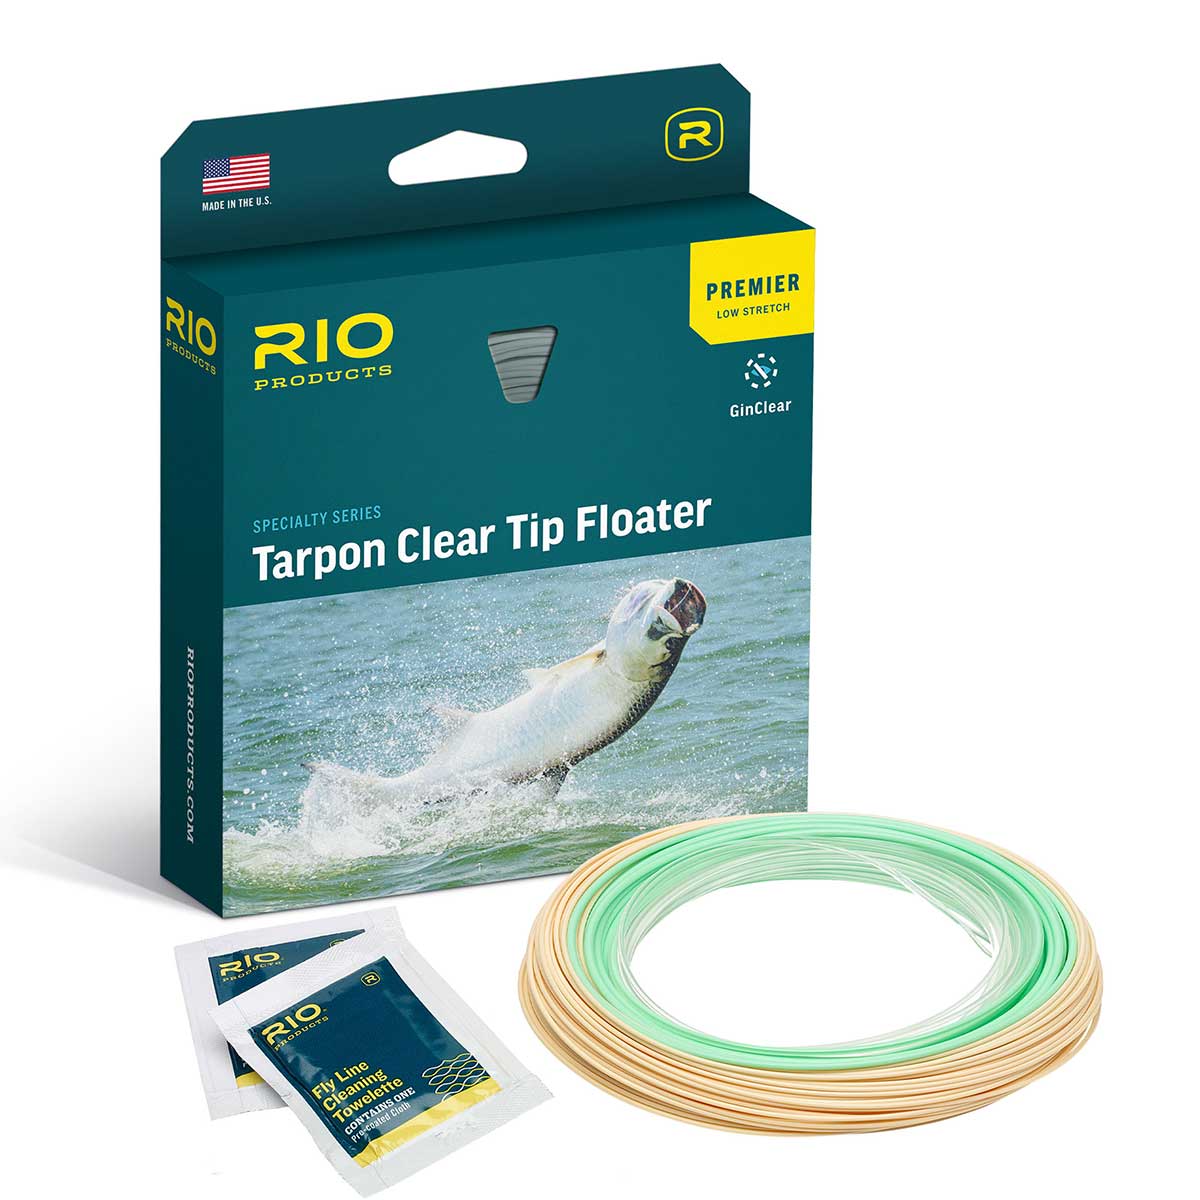 Rio In Touch Gold Fly Line - Armadale Angling, rio gold fly line 